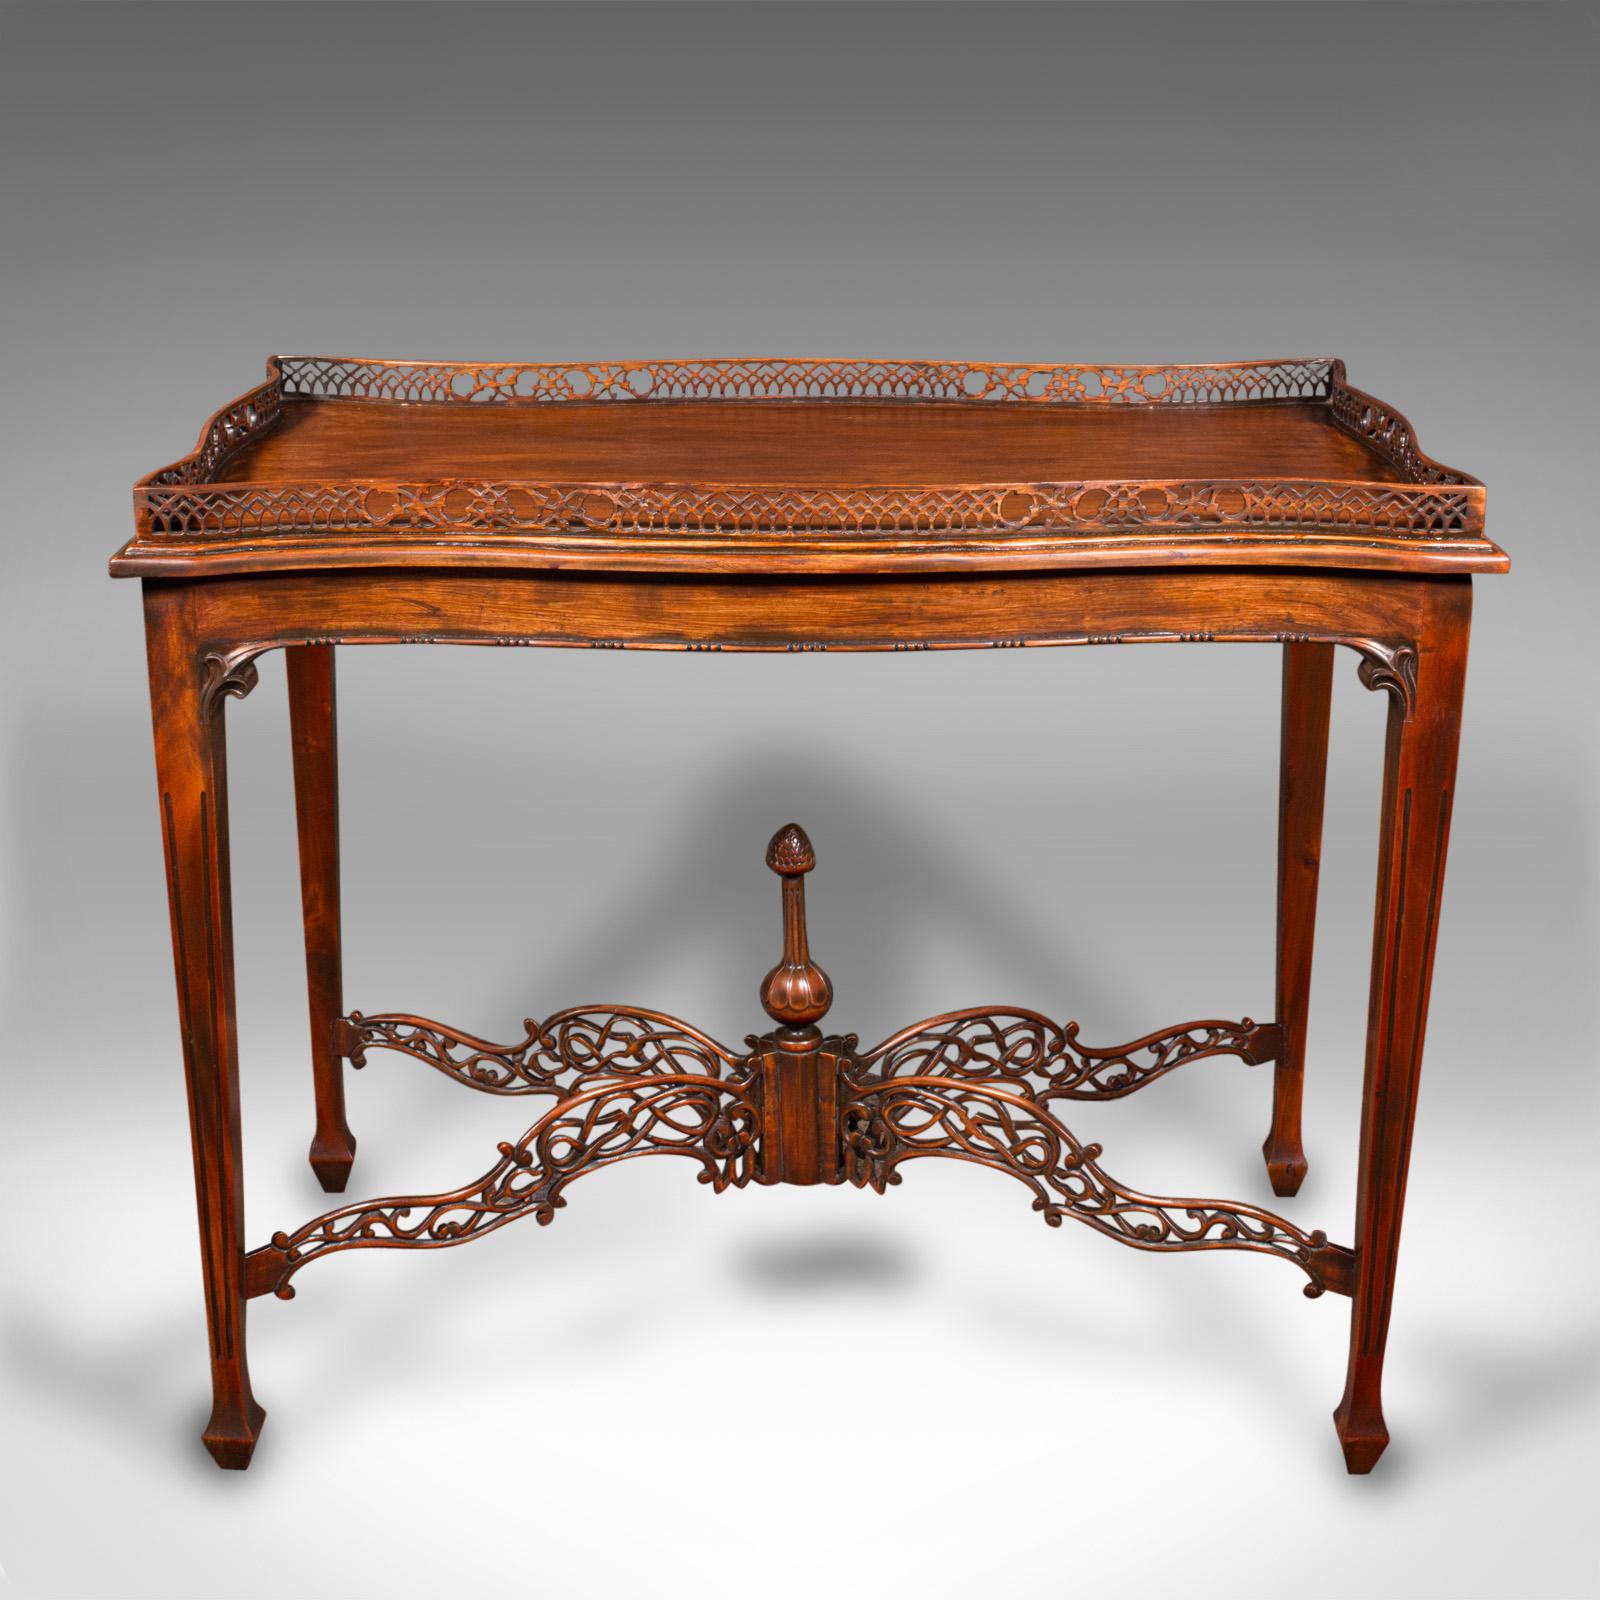 This is a vintage galleried silver table. An English, mahogany ornate table in Chippendale revival taste, dating to the late 20th century, circa 1980.

Striking example of revival furniture, graced with superb fretwork
Displays a desirable aged